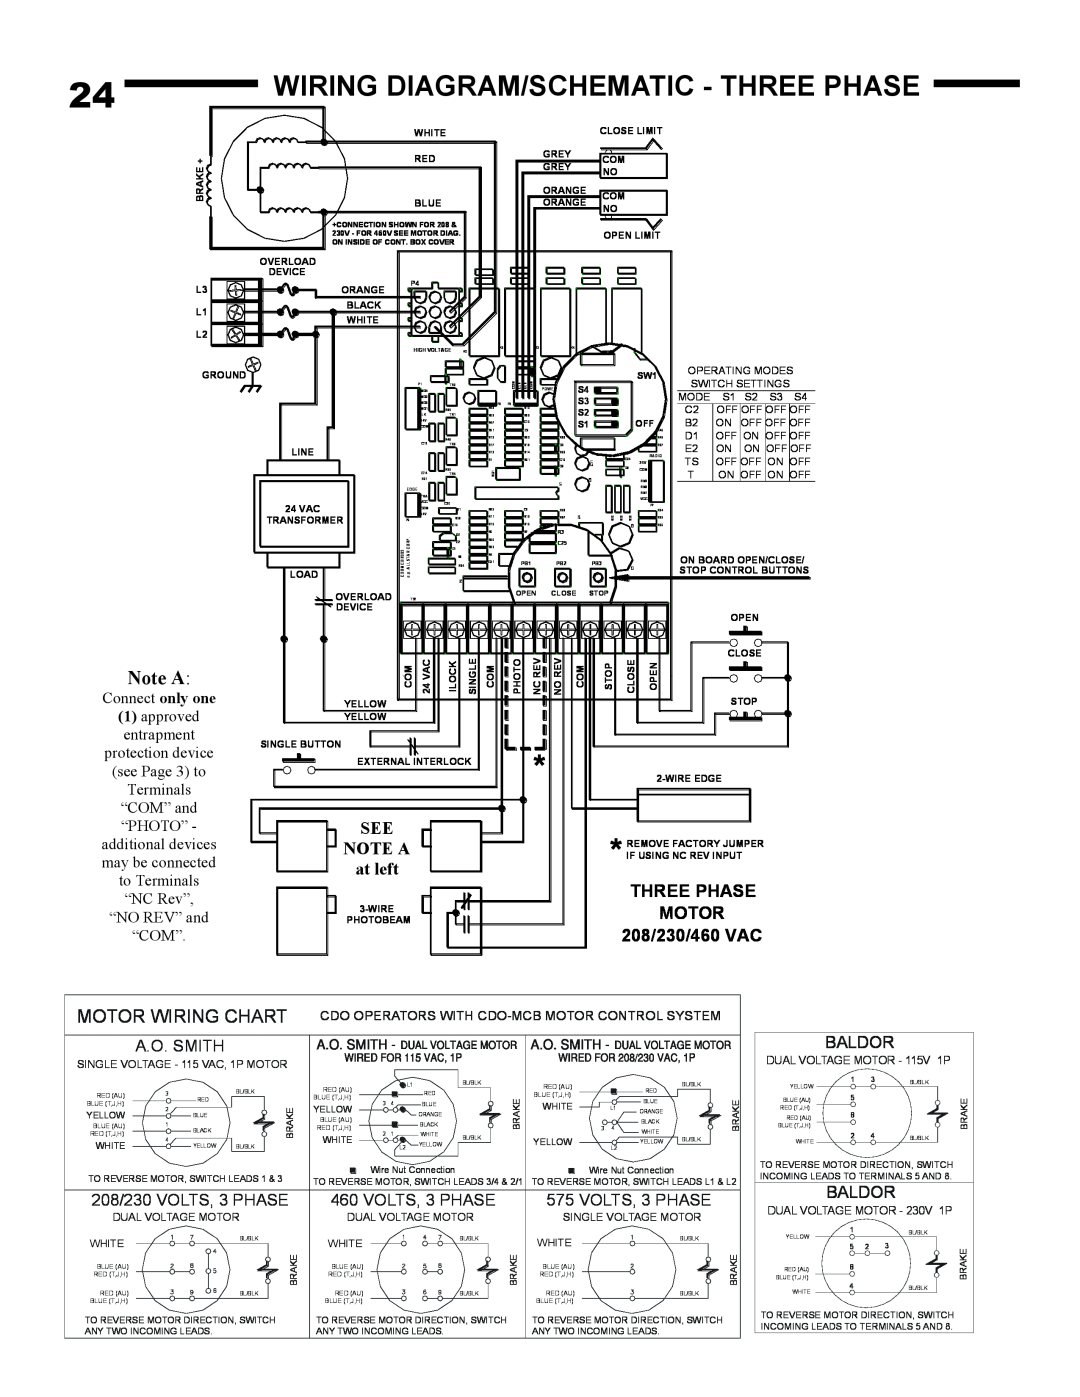 Linear AUJ-S Wiring Diagram/Schematic - Three Phase, Note A, Motor Wiring Chart, SEE NOTE A at left, A.O. Smith, Baldor 